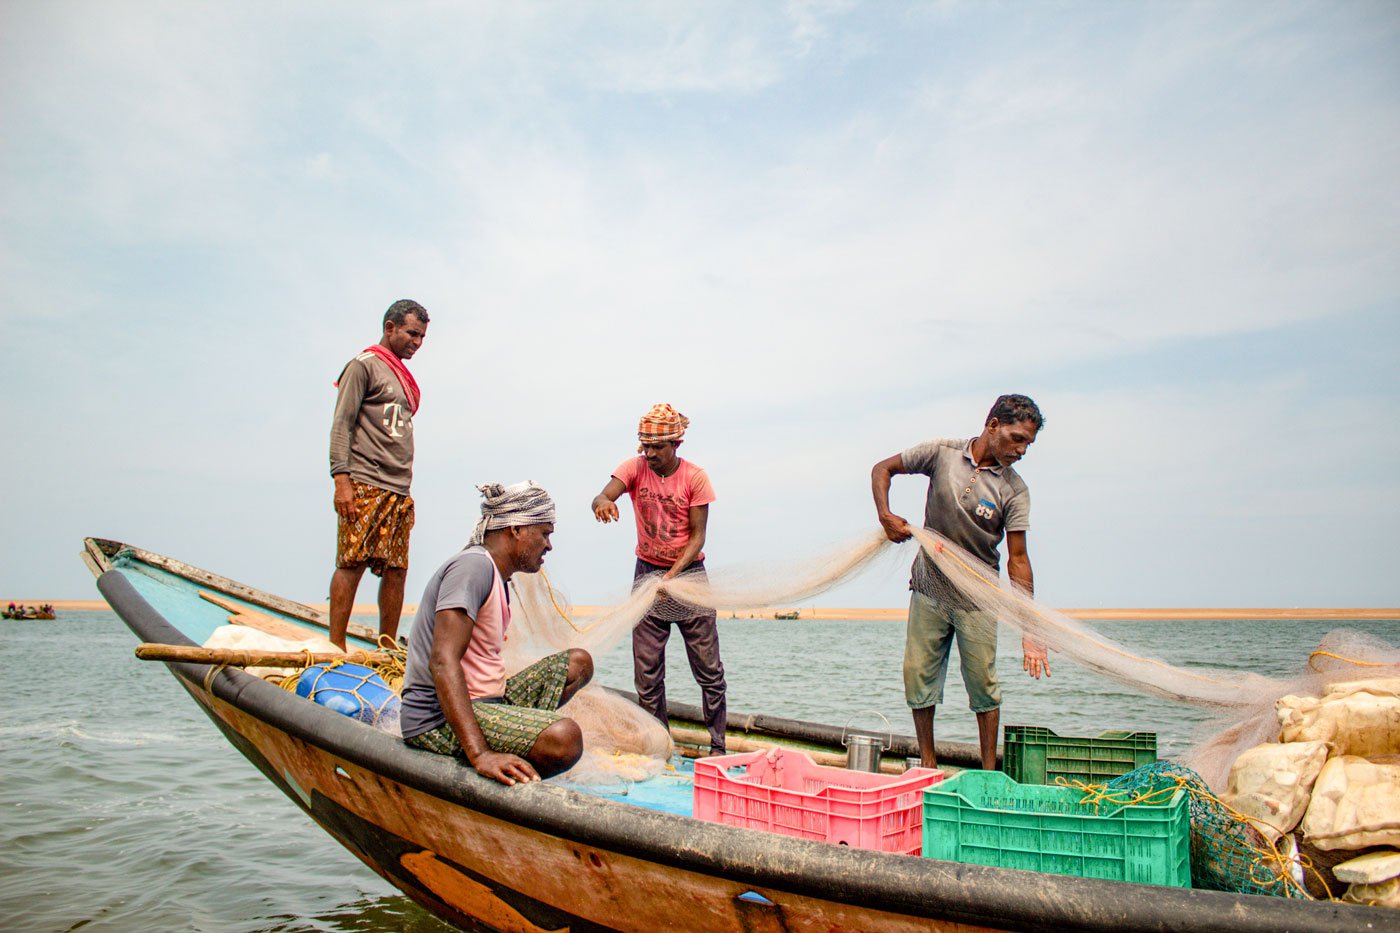 Fishermen getting ready to use the nets to fish in Ganjam district, Odisha.